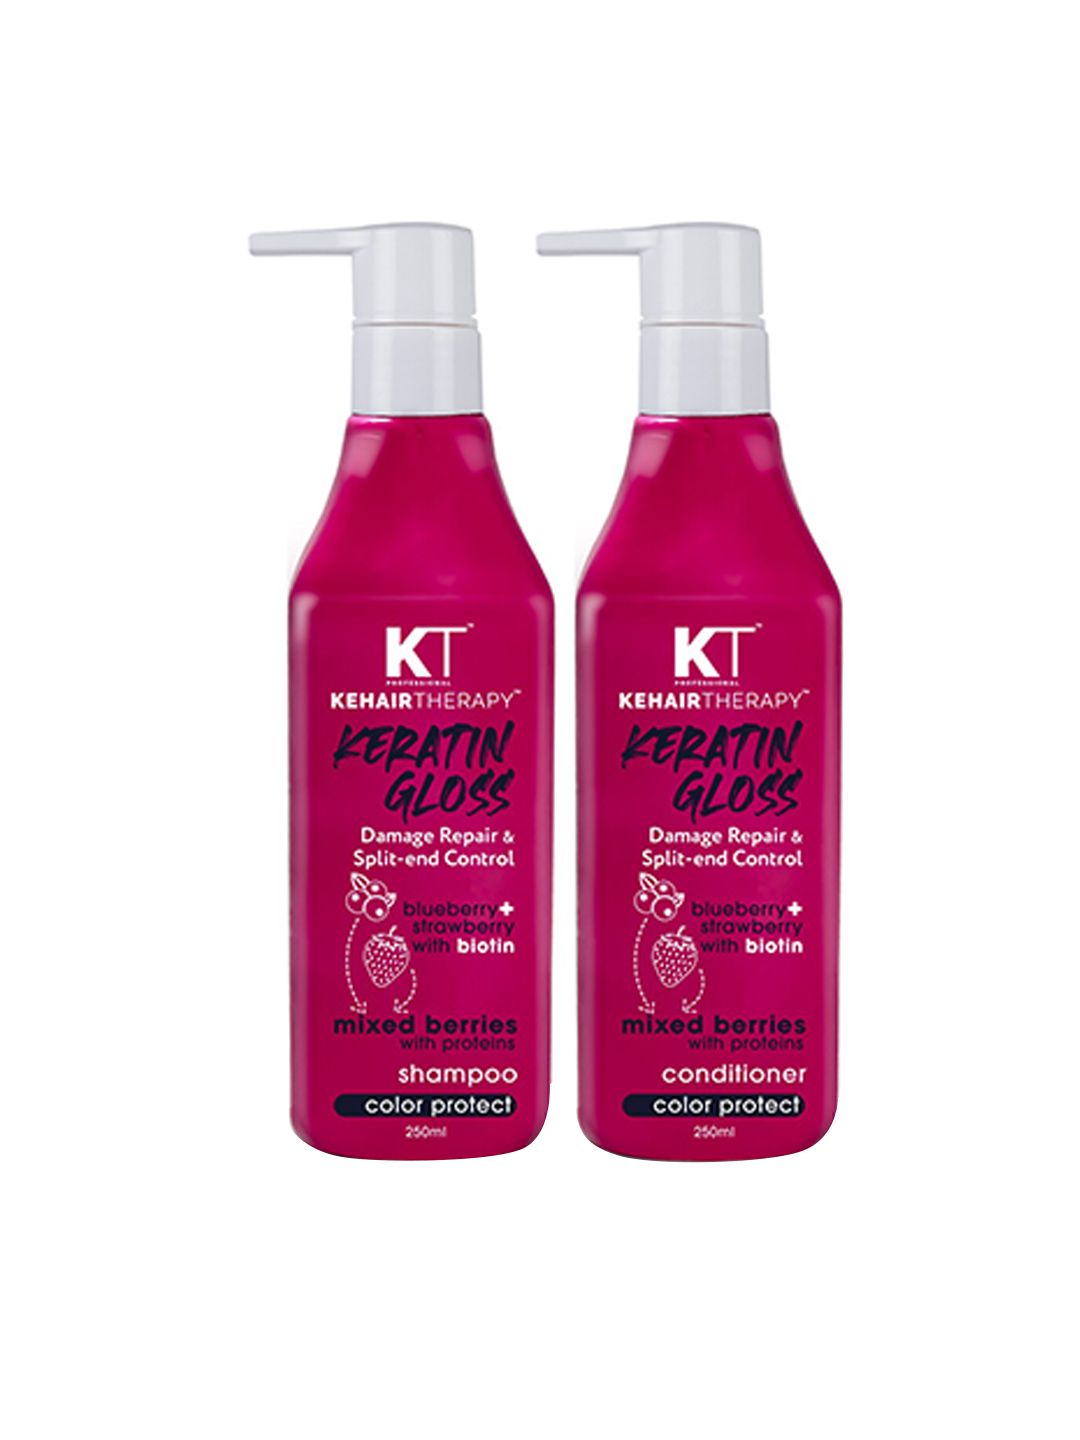 KEHAIRTHERAPY Set of 2 KT Professional Keratin Damage Control Shampoo & Conditioner Price in India